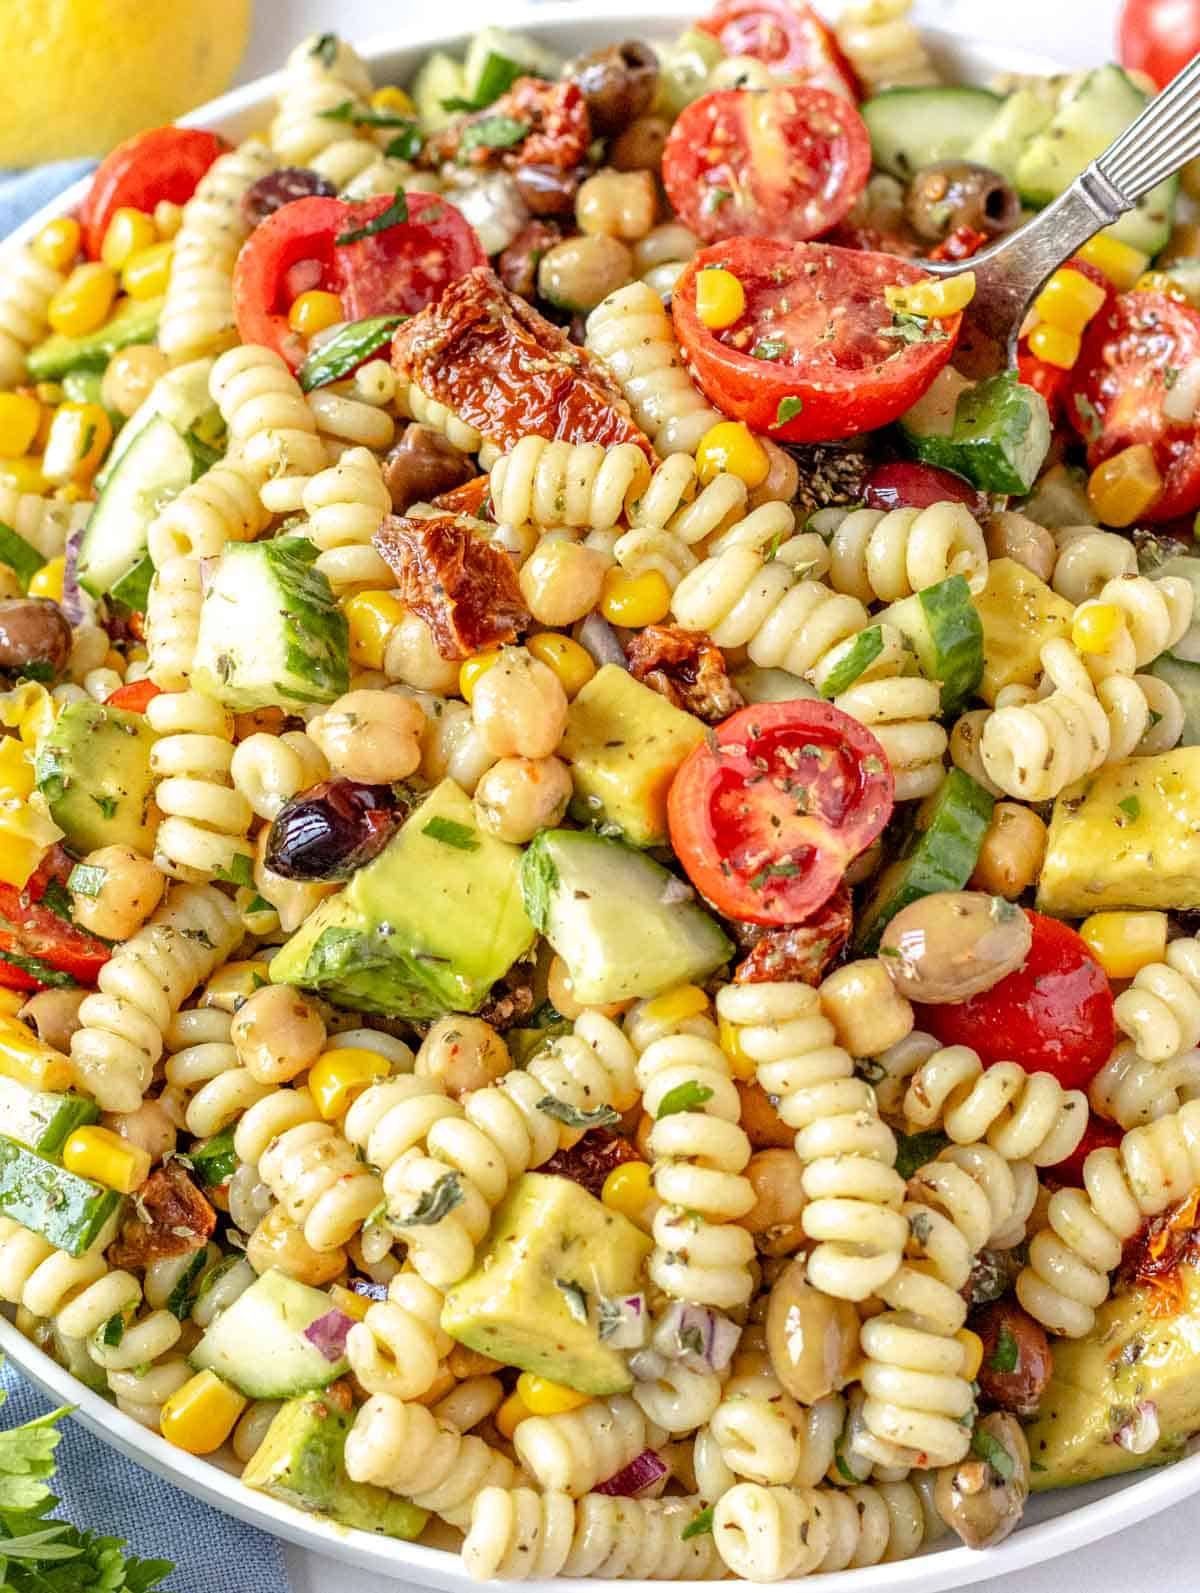 Chickpea Pasta Salad with cherry tomatoes and avocado on a white plate